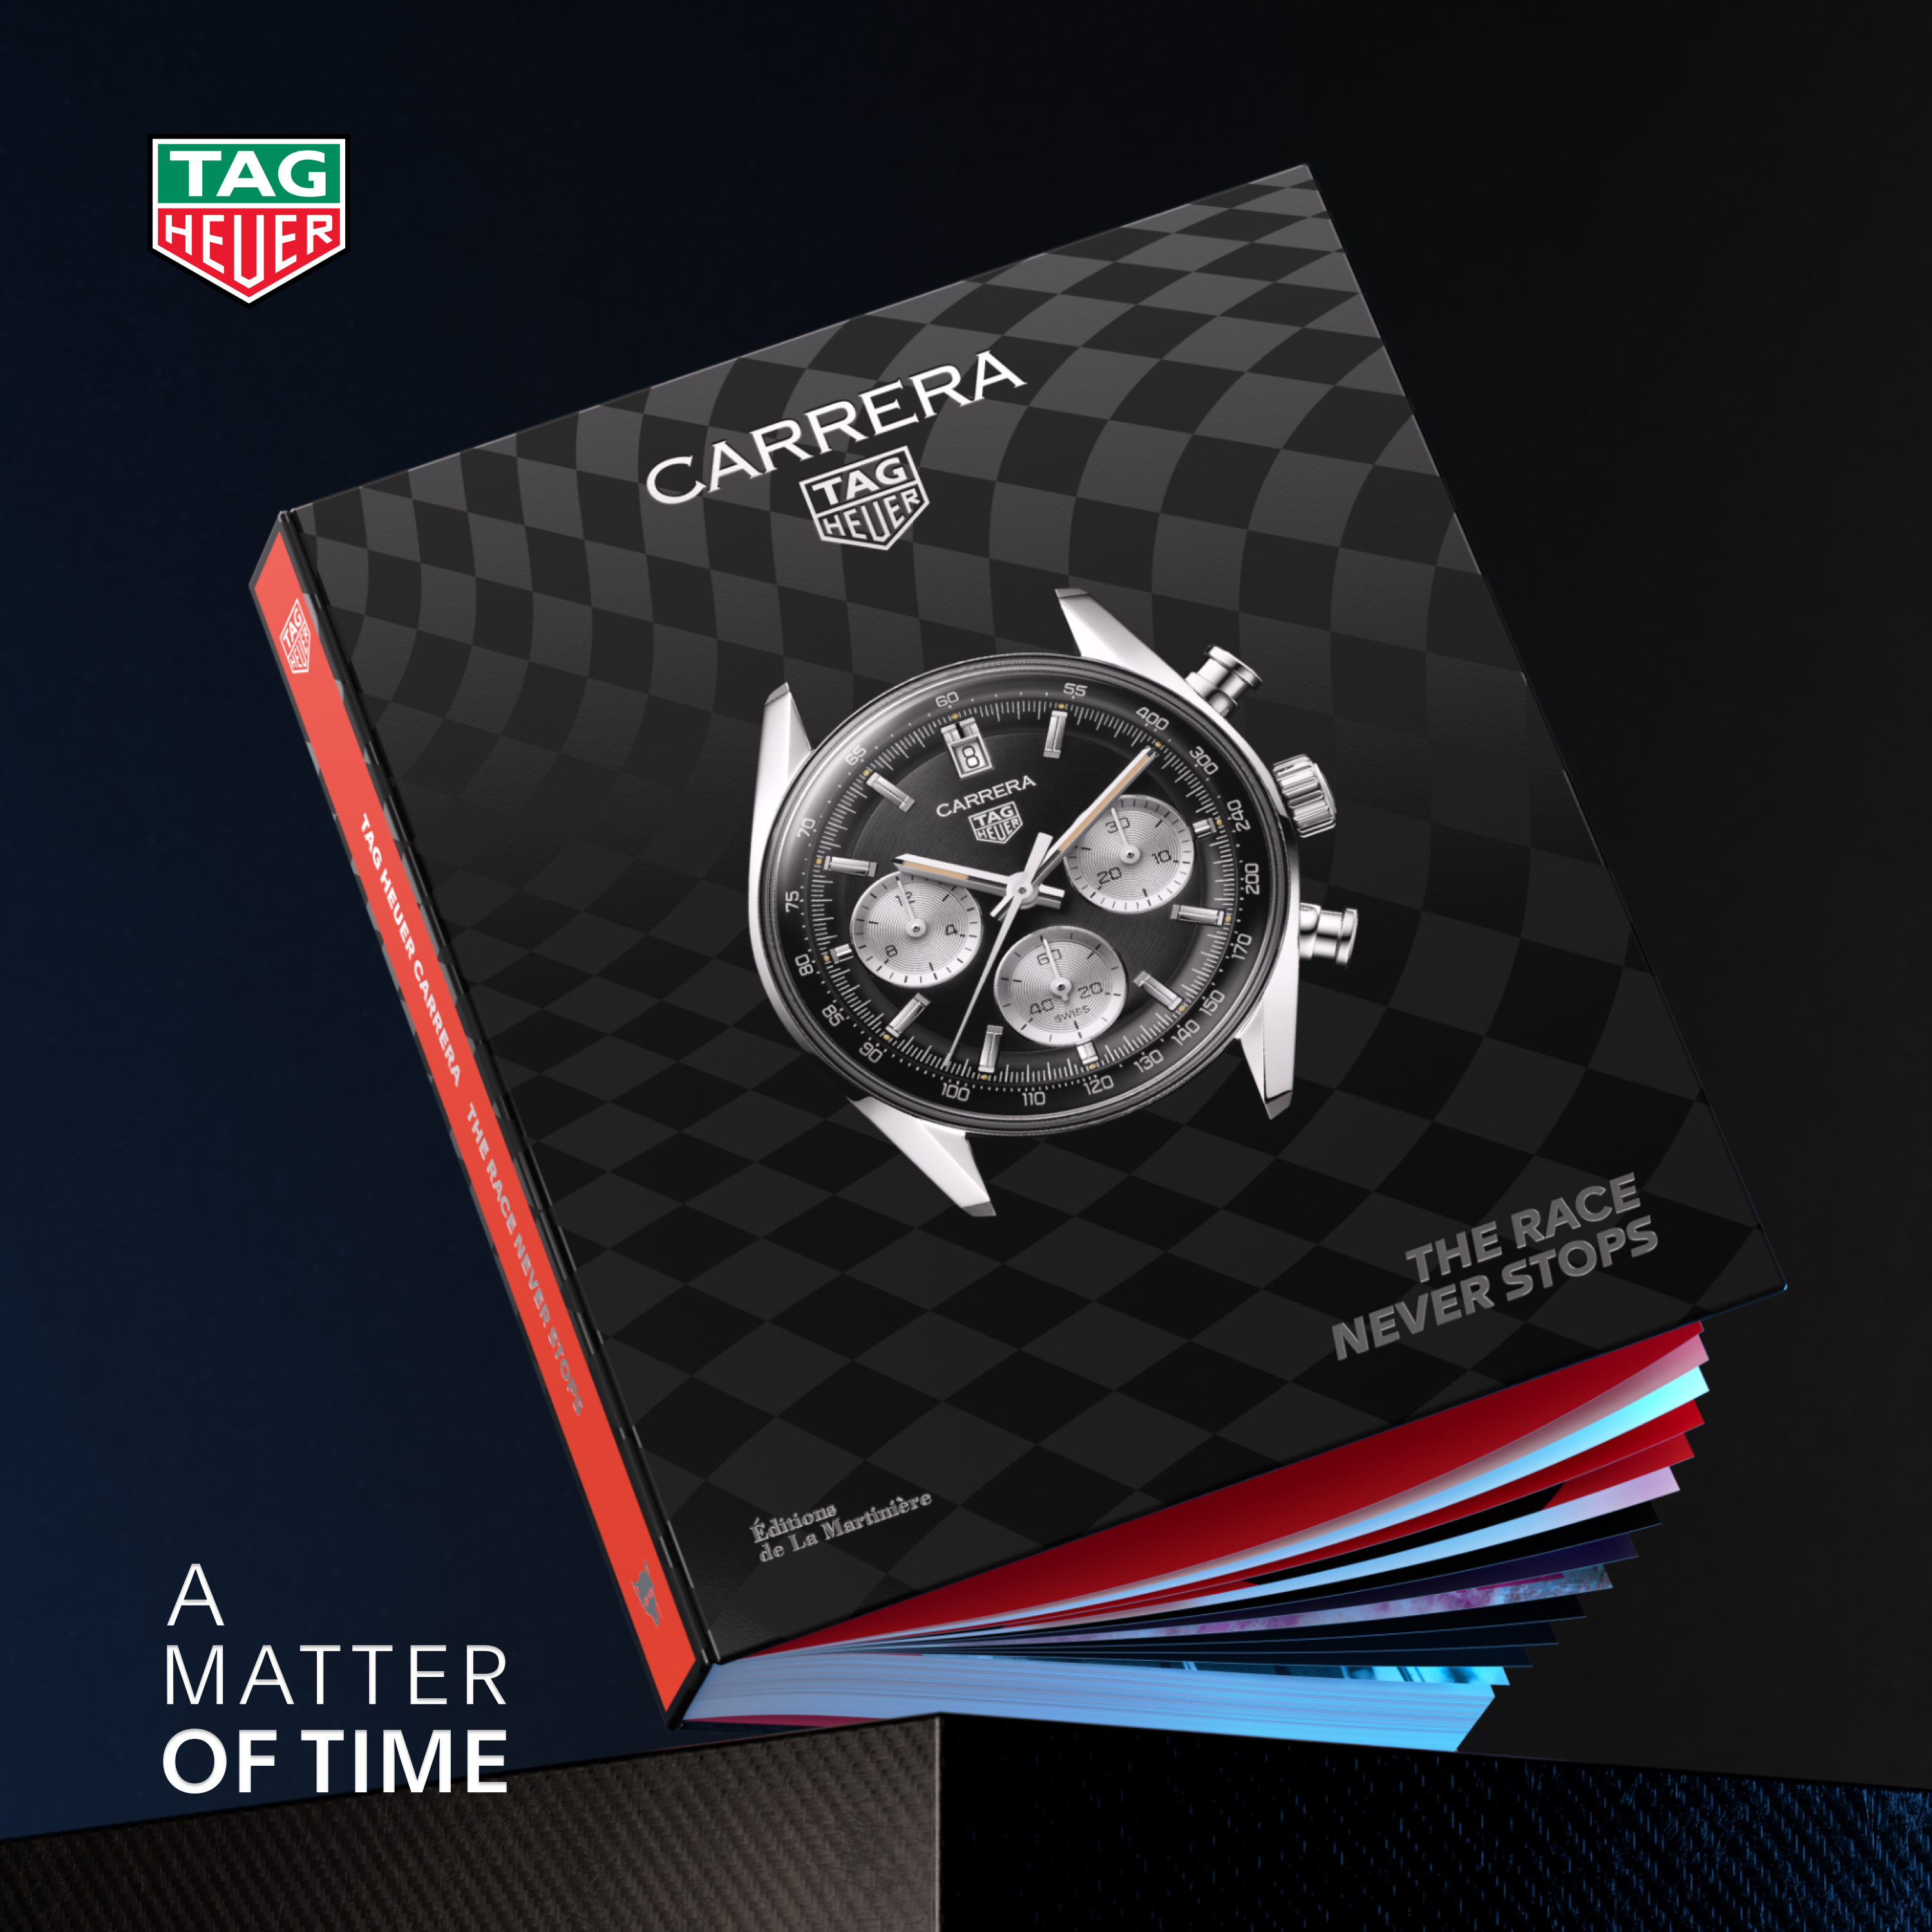 From racetracks to your wrist: 3 motorsport stories that influenced the Carrera